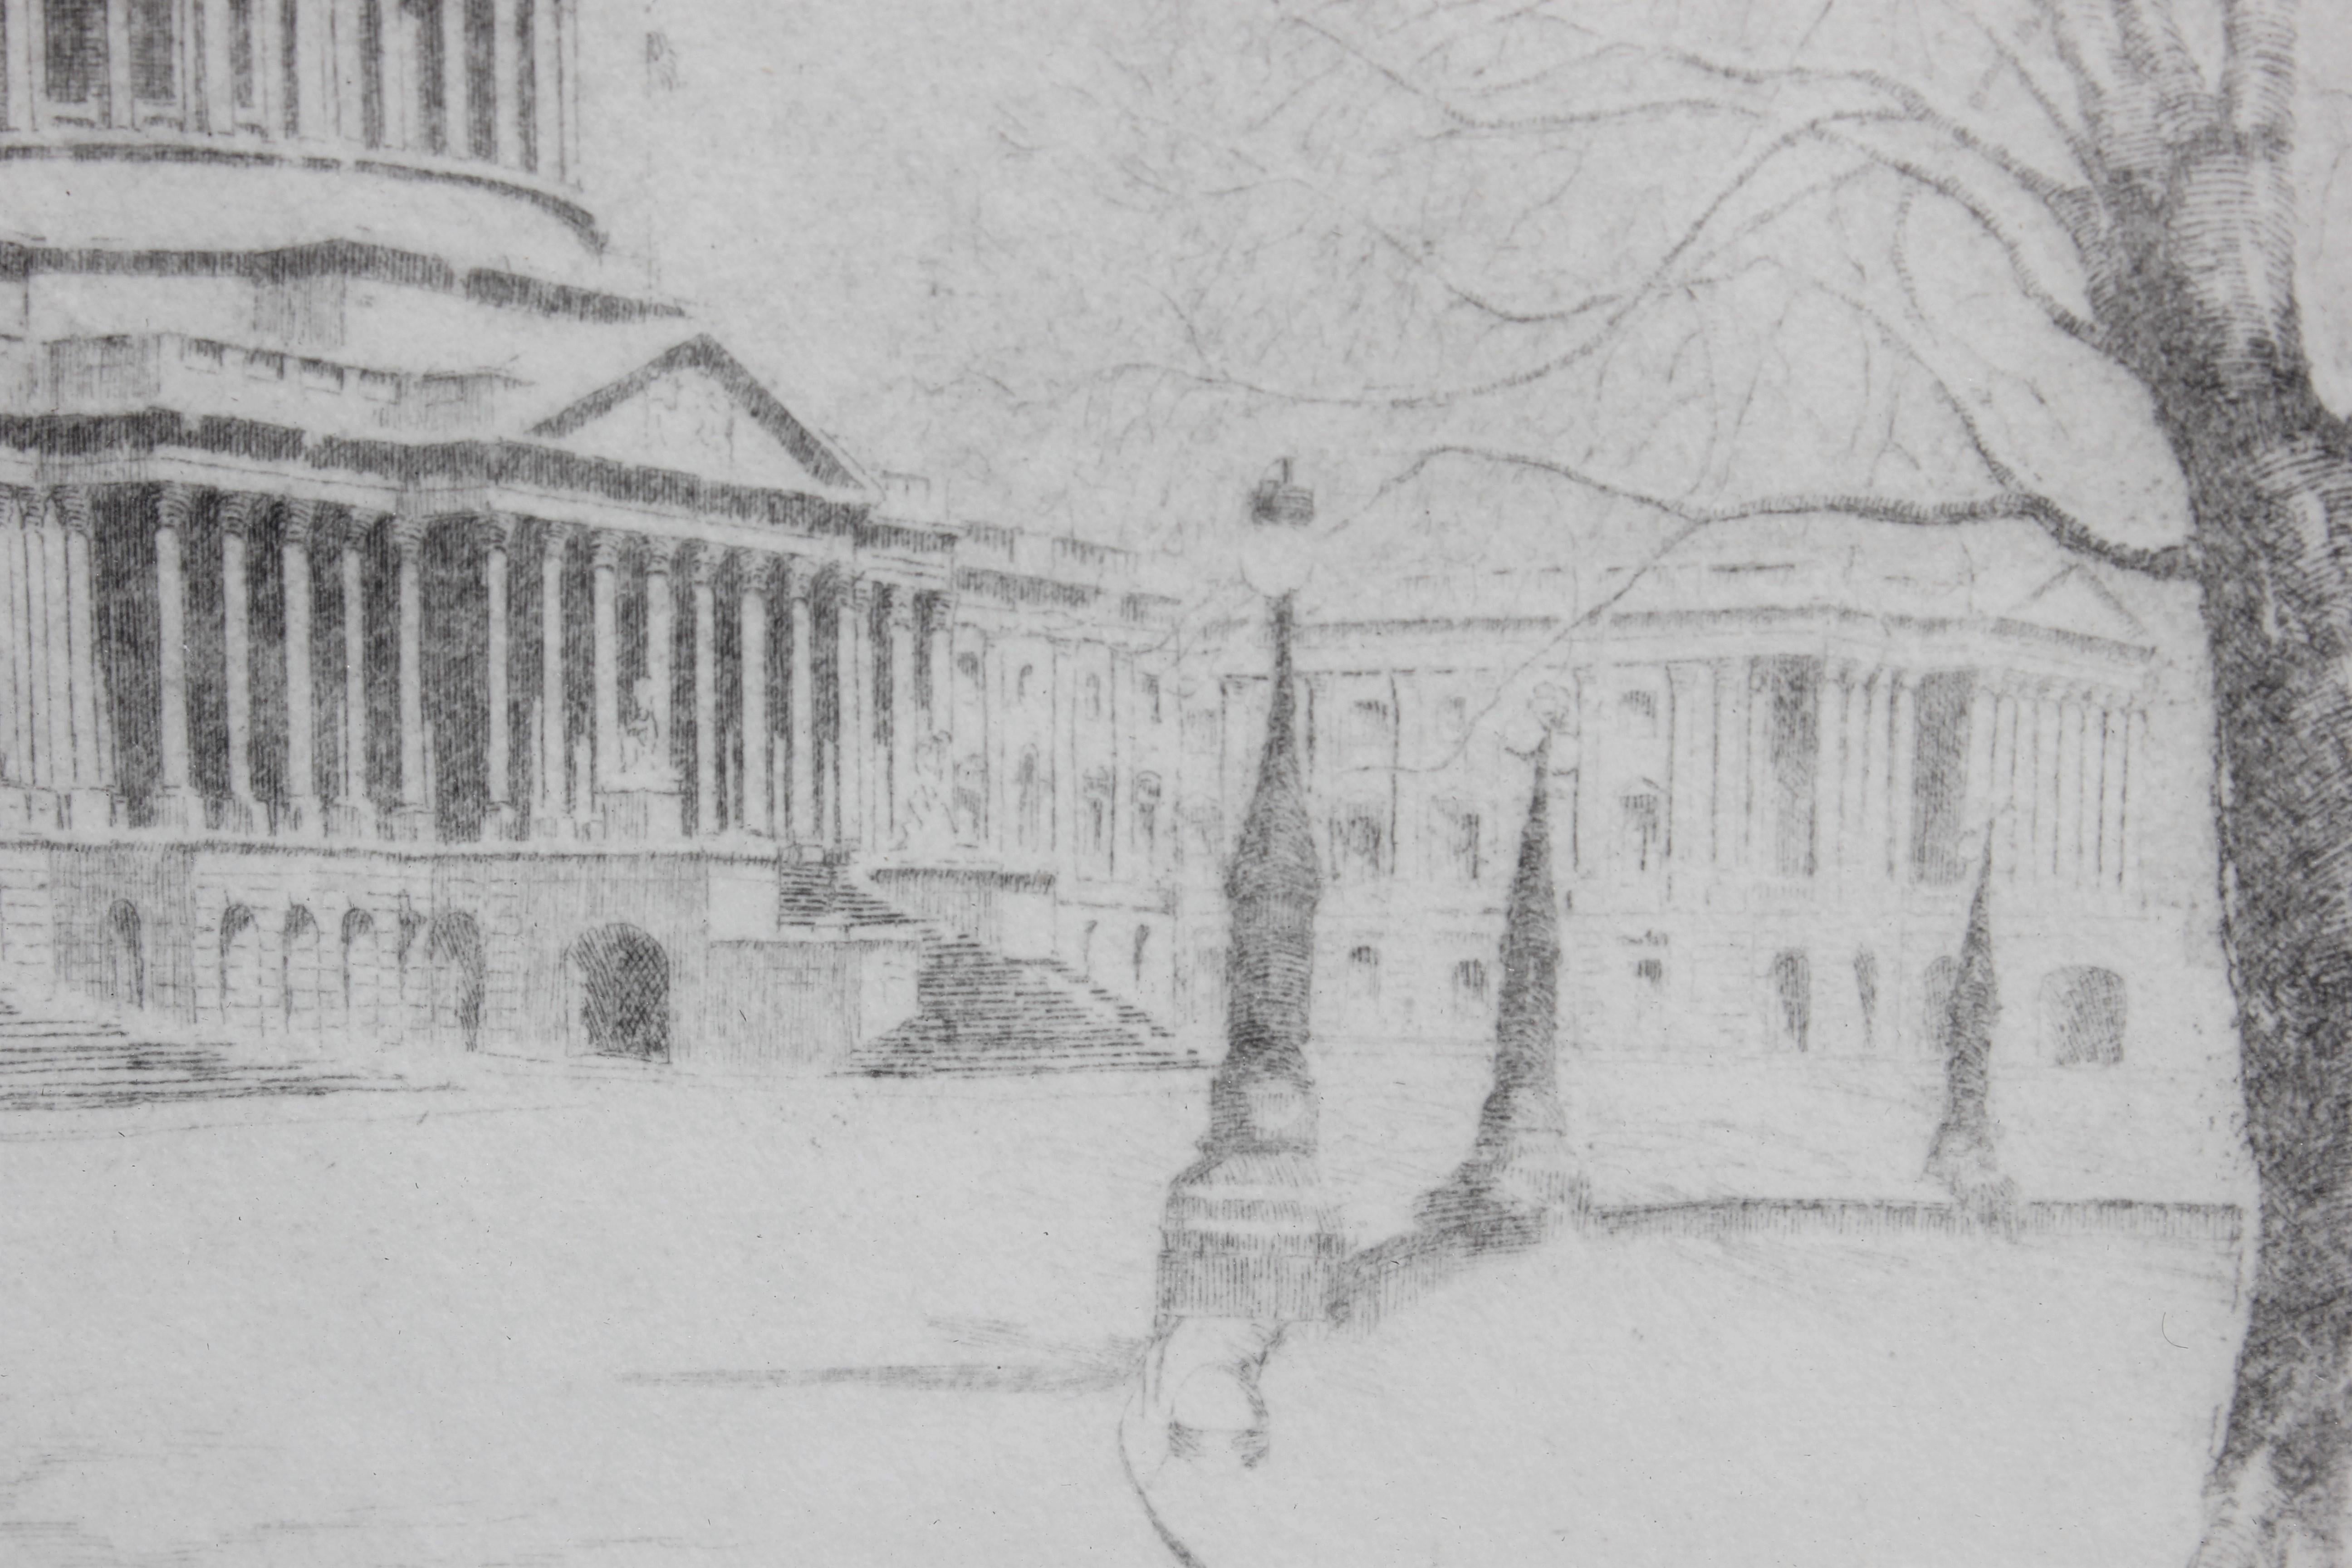 Drawing of the Capitol done in 1973. It is a special edition for Republican National Association. Edition 422 out of 1,500. 
Framed in a wood frame with a white matte. 
Signed and Titled by the artist. 

Dimensions without Frame: H 9.5 in x W 11 in.